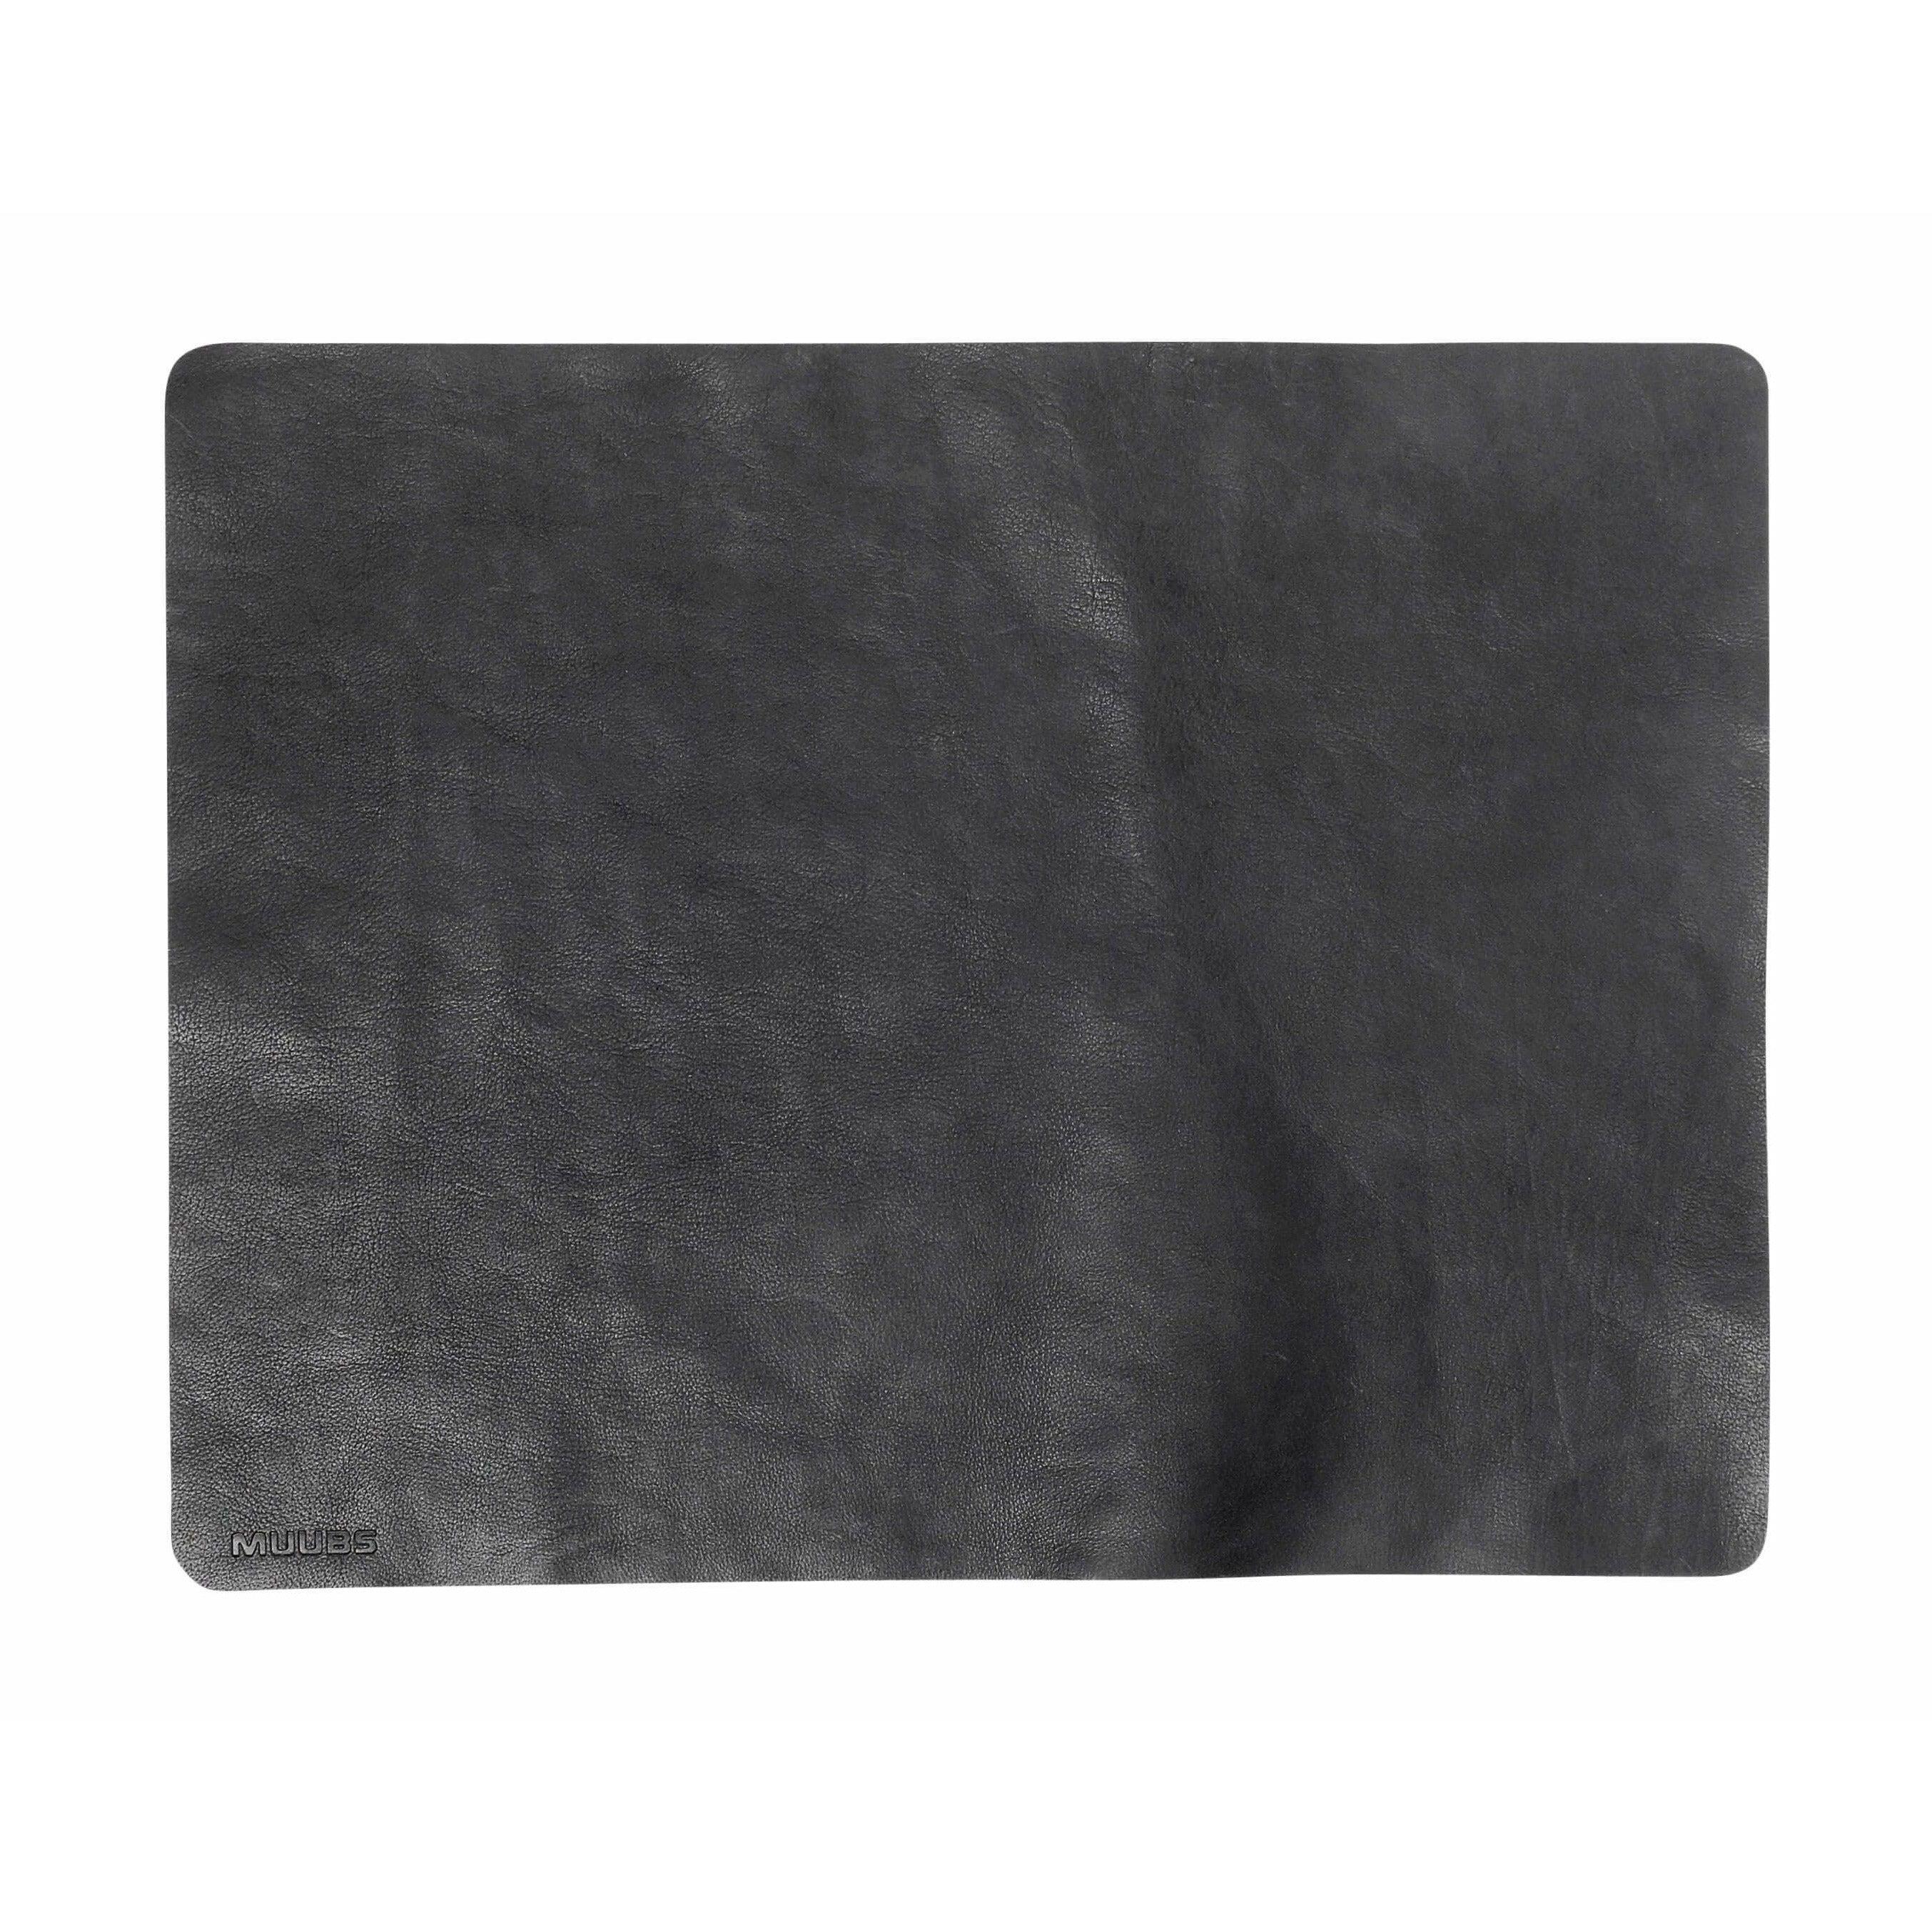 Muubs Camou Placemat 45cm, Black Leather